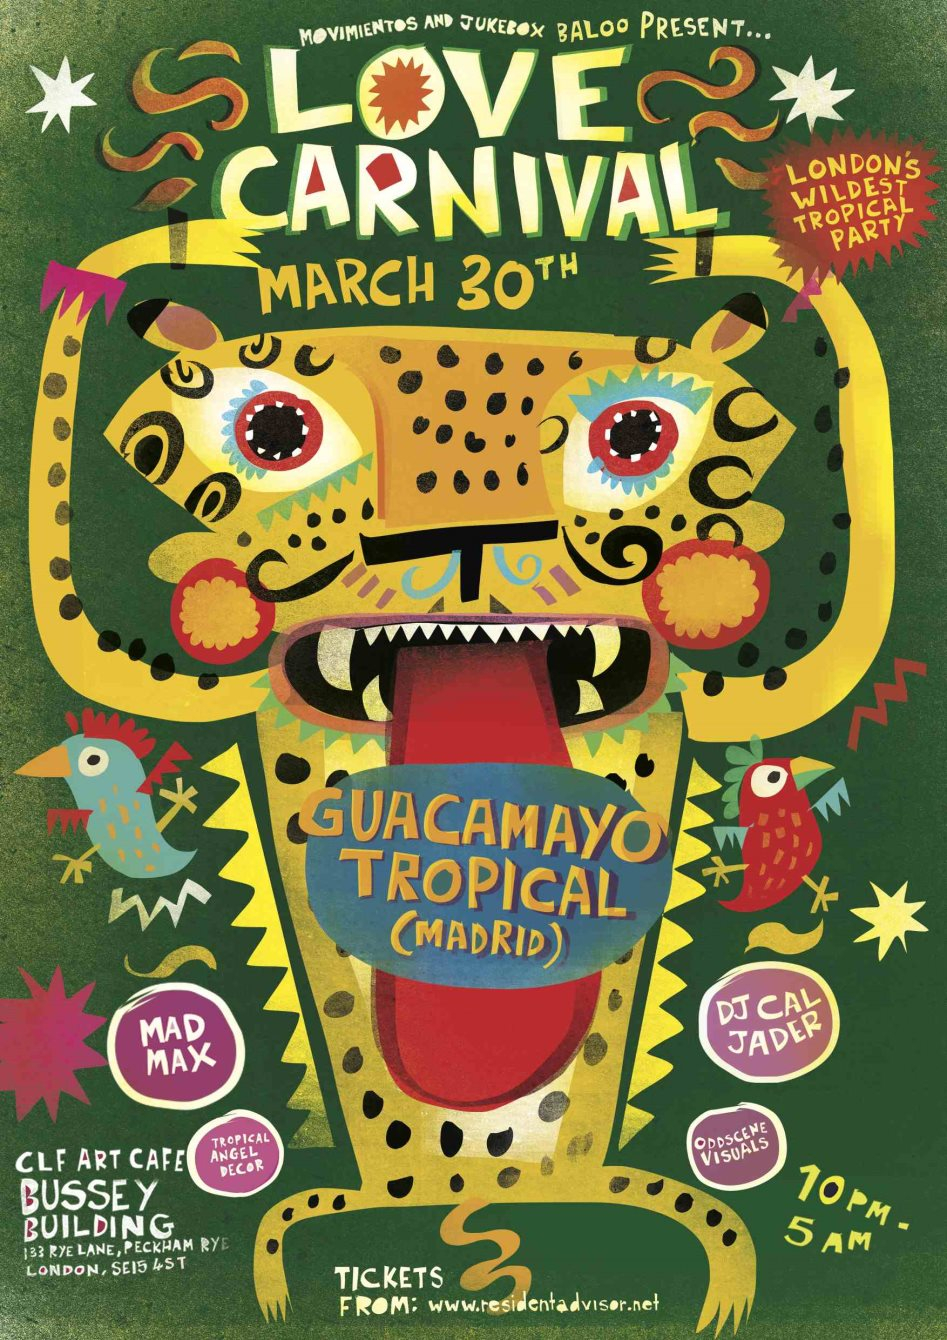 Love Carnival x Guacamayo Tropical - Flyer front